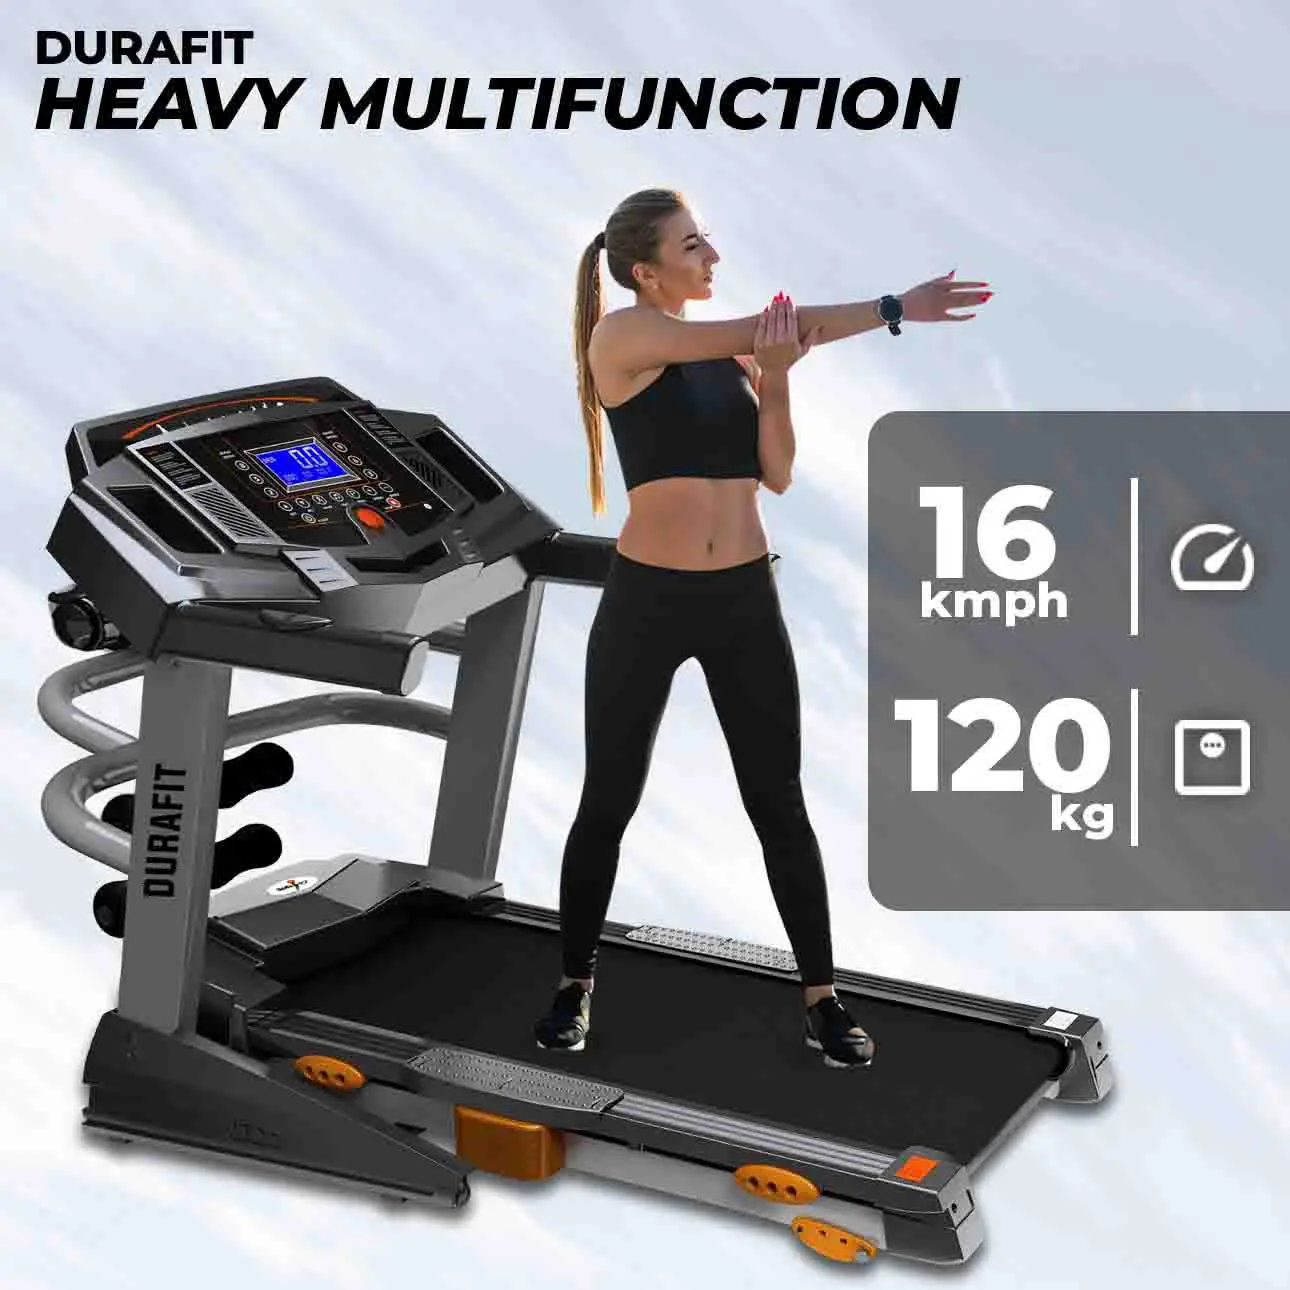 Durafit Heavy Multifunction Treadmill with 16Kmph  max speed 